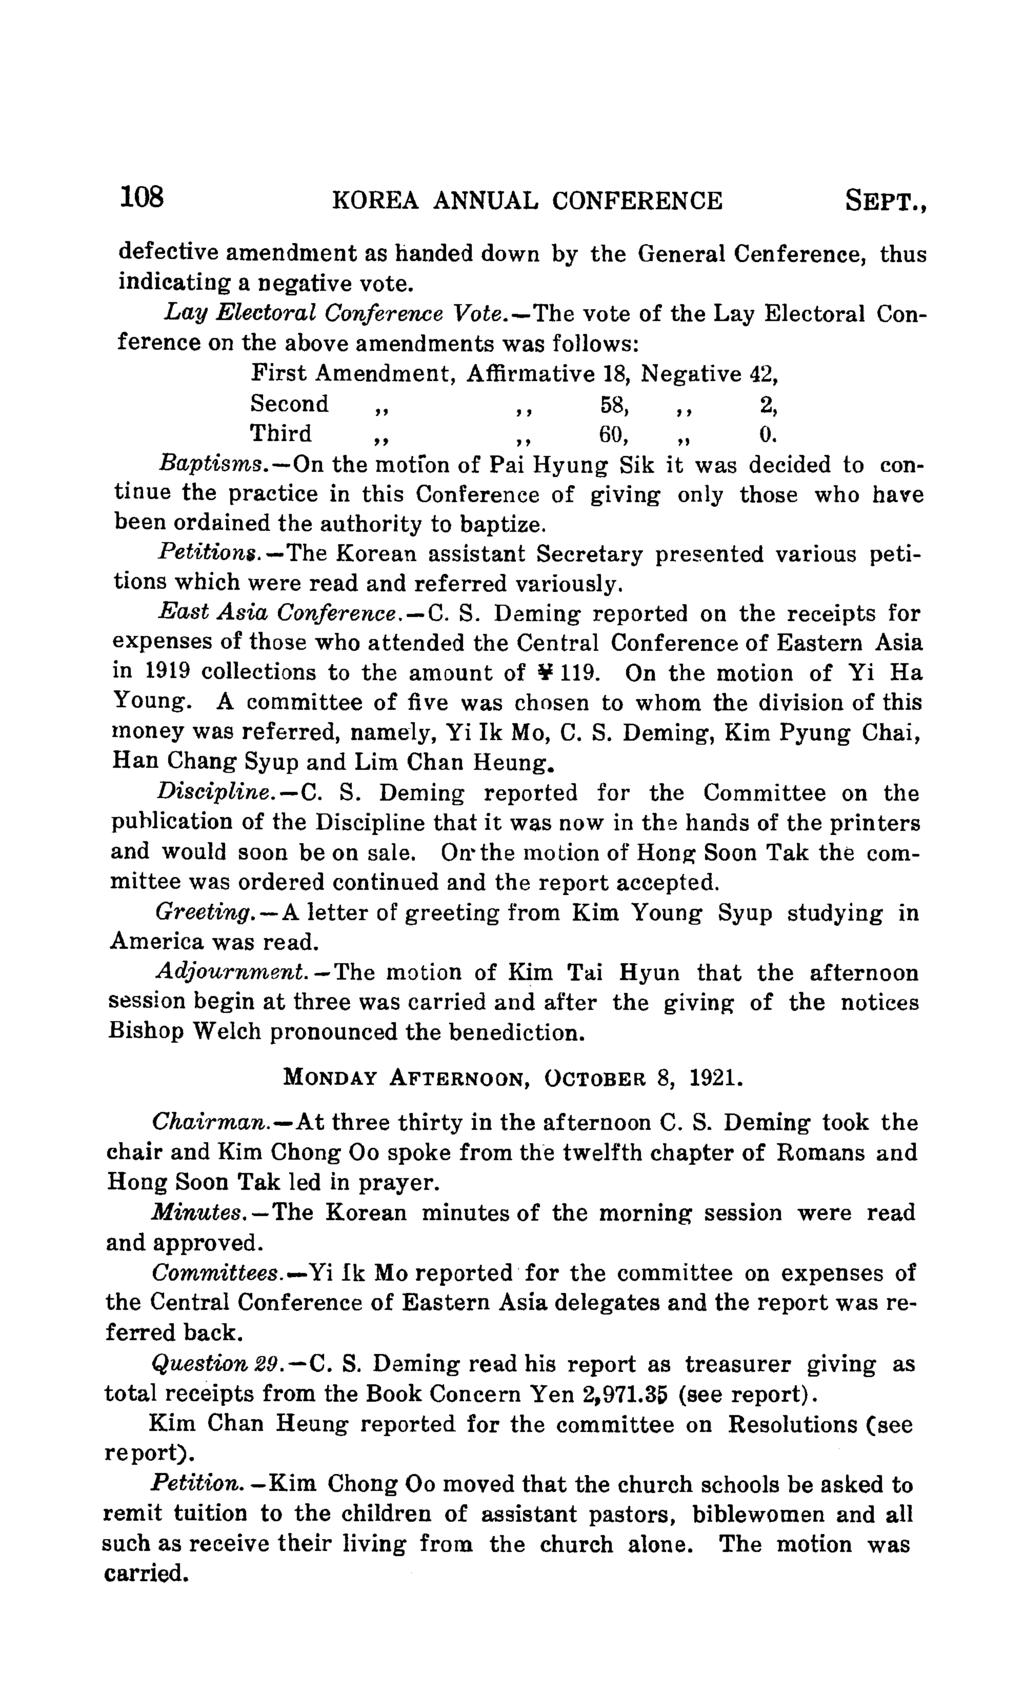 108 KOREA ANNUAL CONFERENCE SEPT., defective amendment as handed down by the General Cenference, thus indicating a negative vote. Lay Electoral Conference Vote.